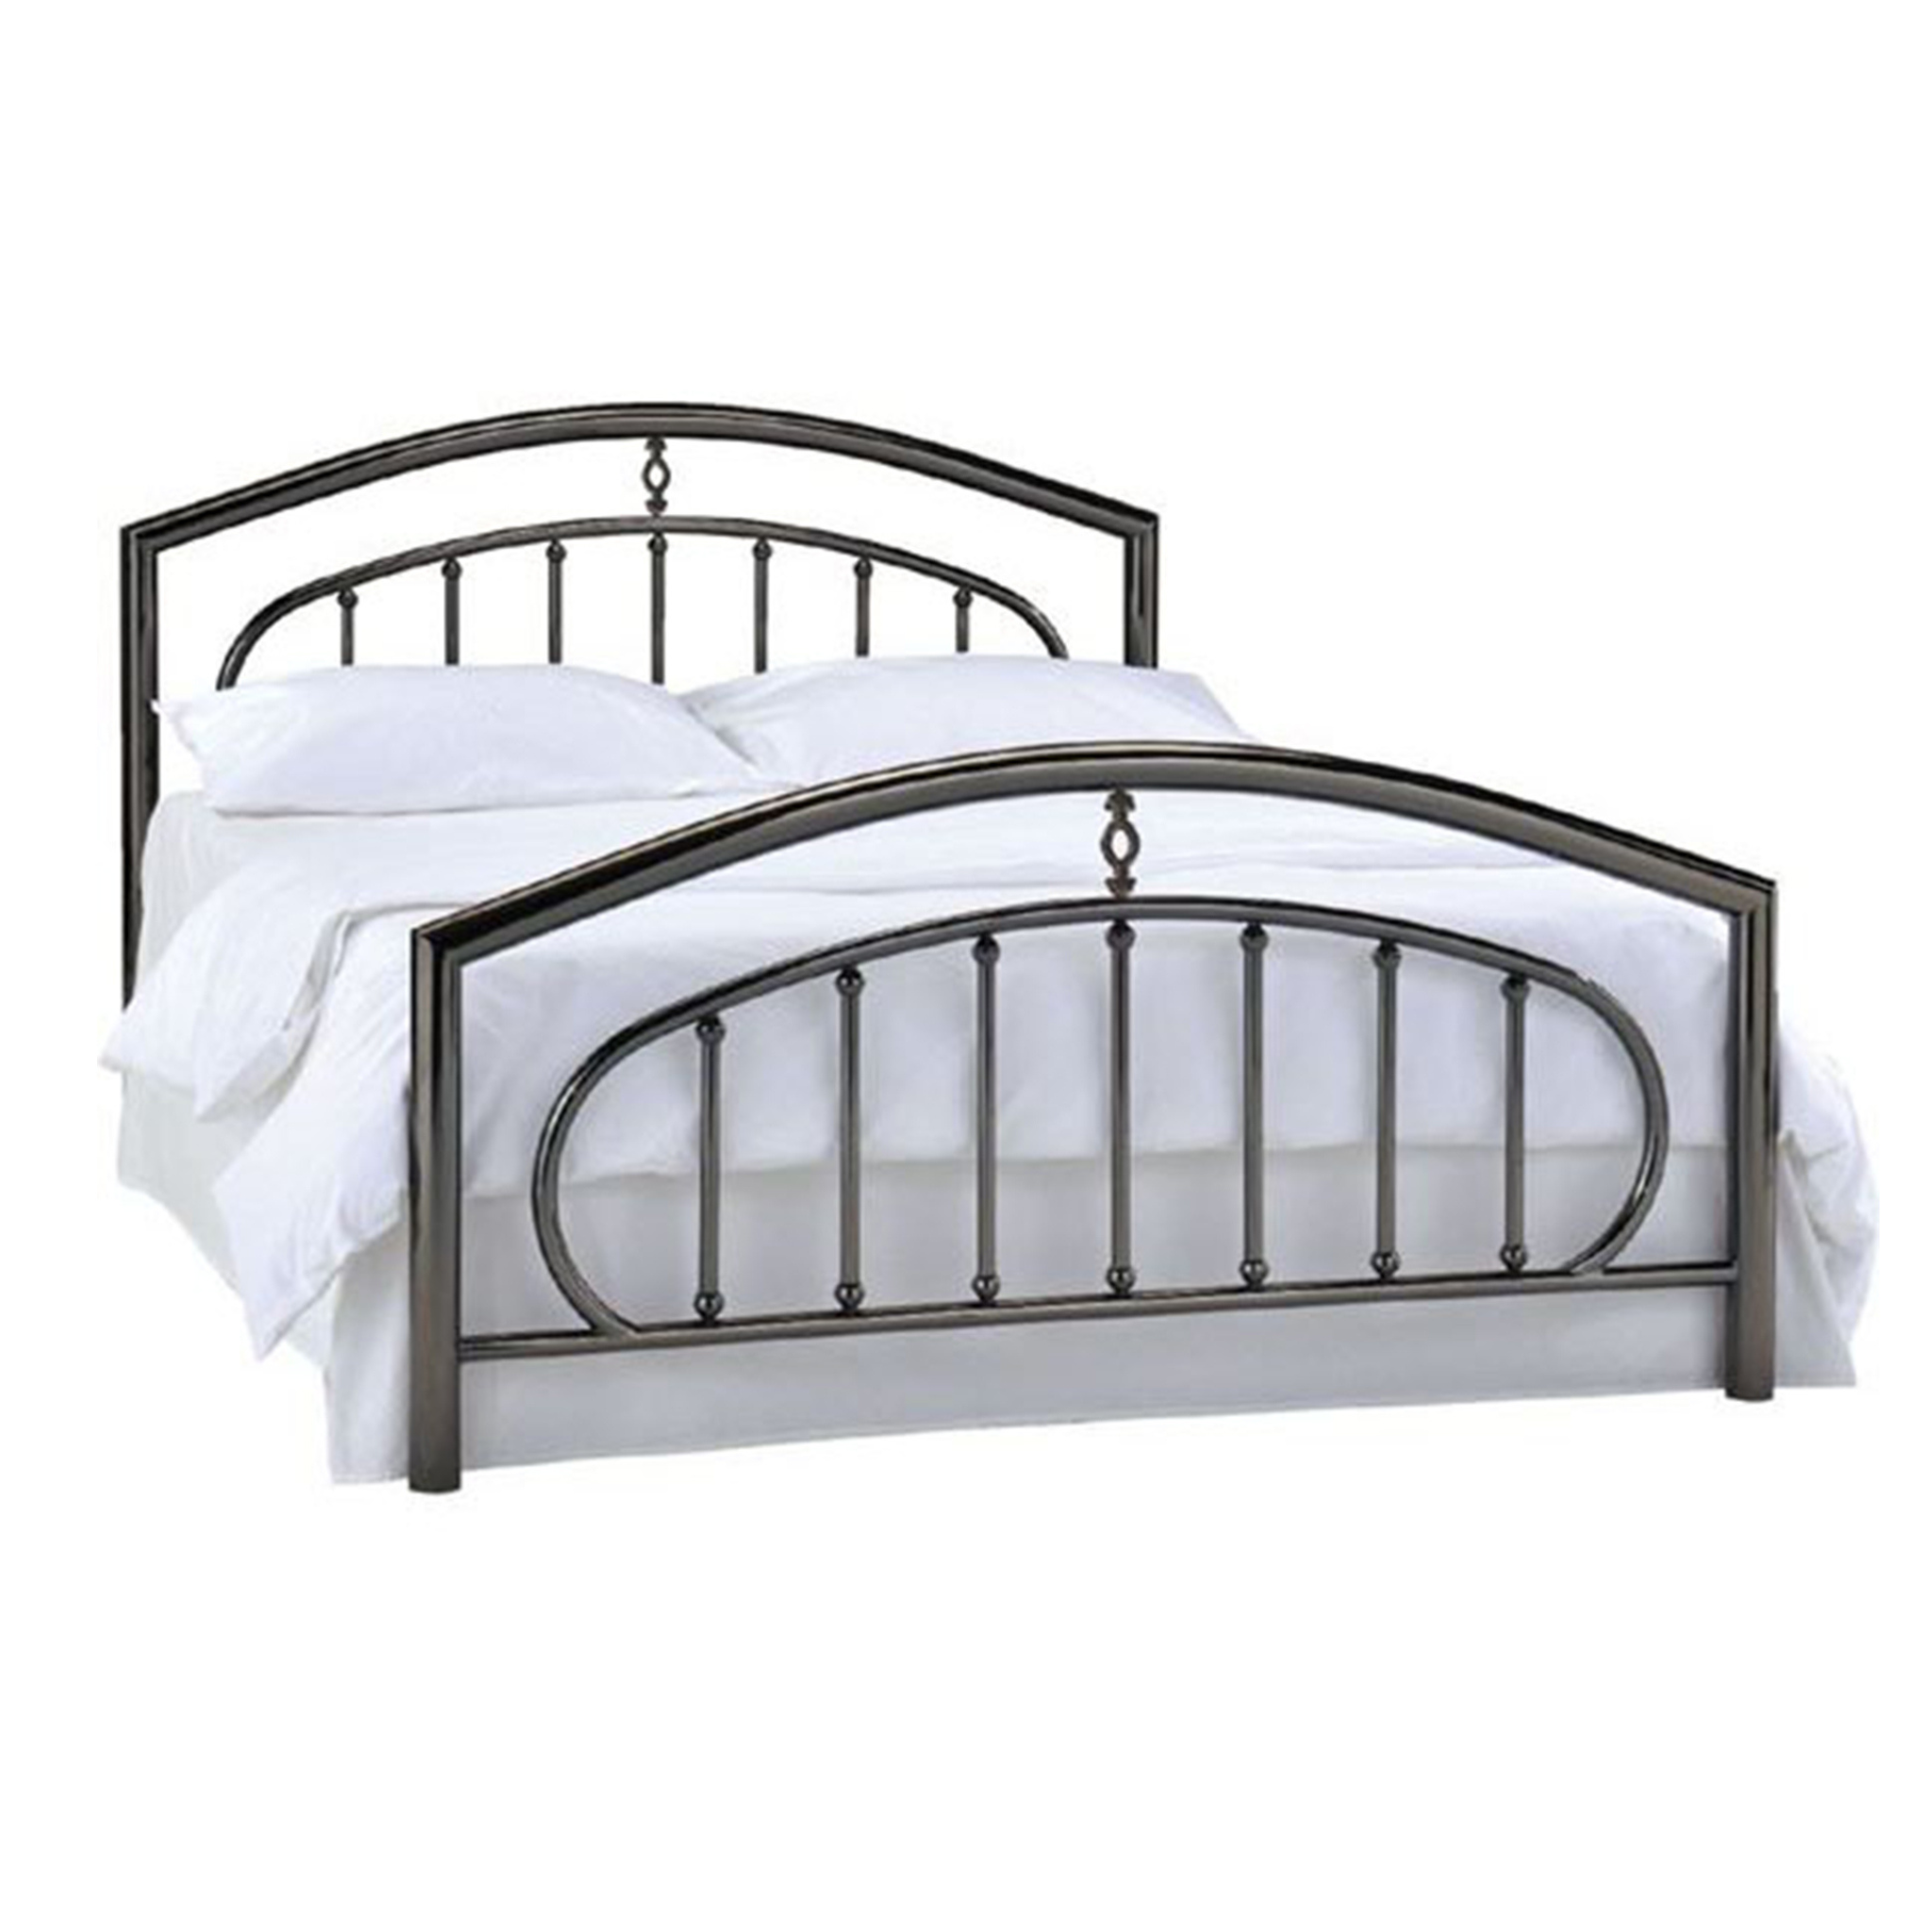 Orion Steel Bed